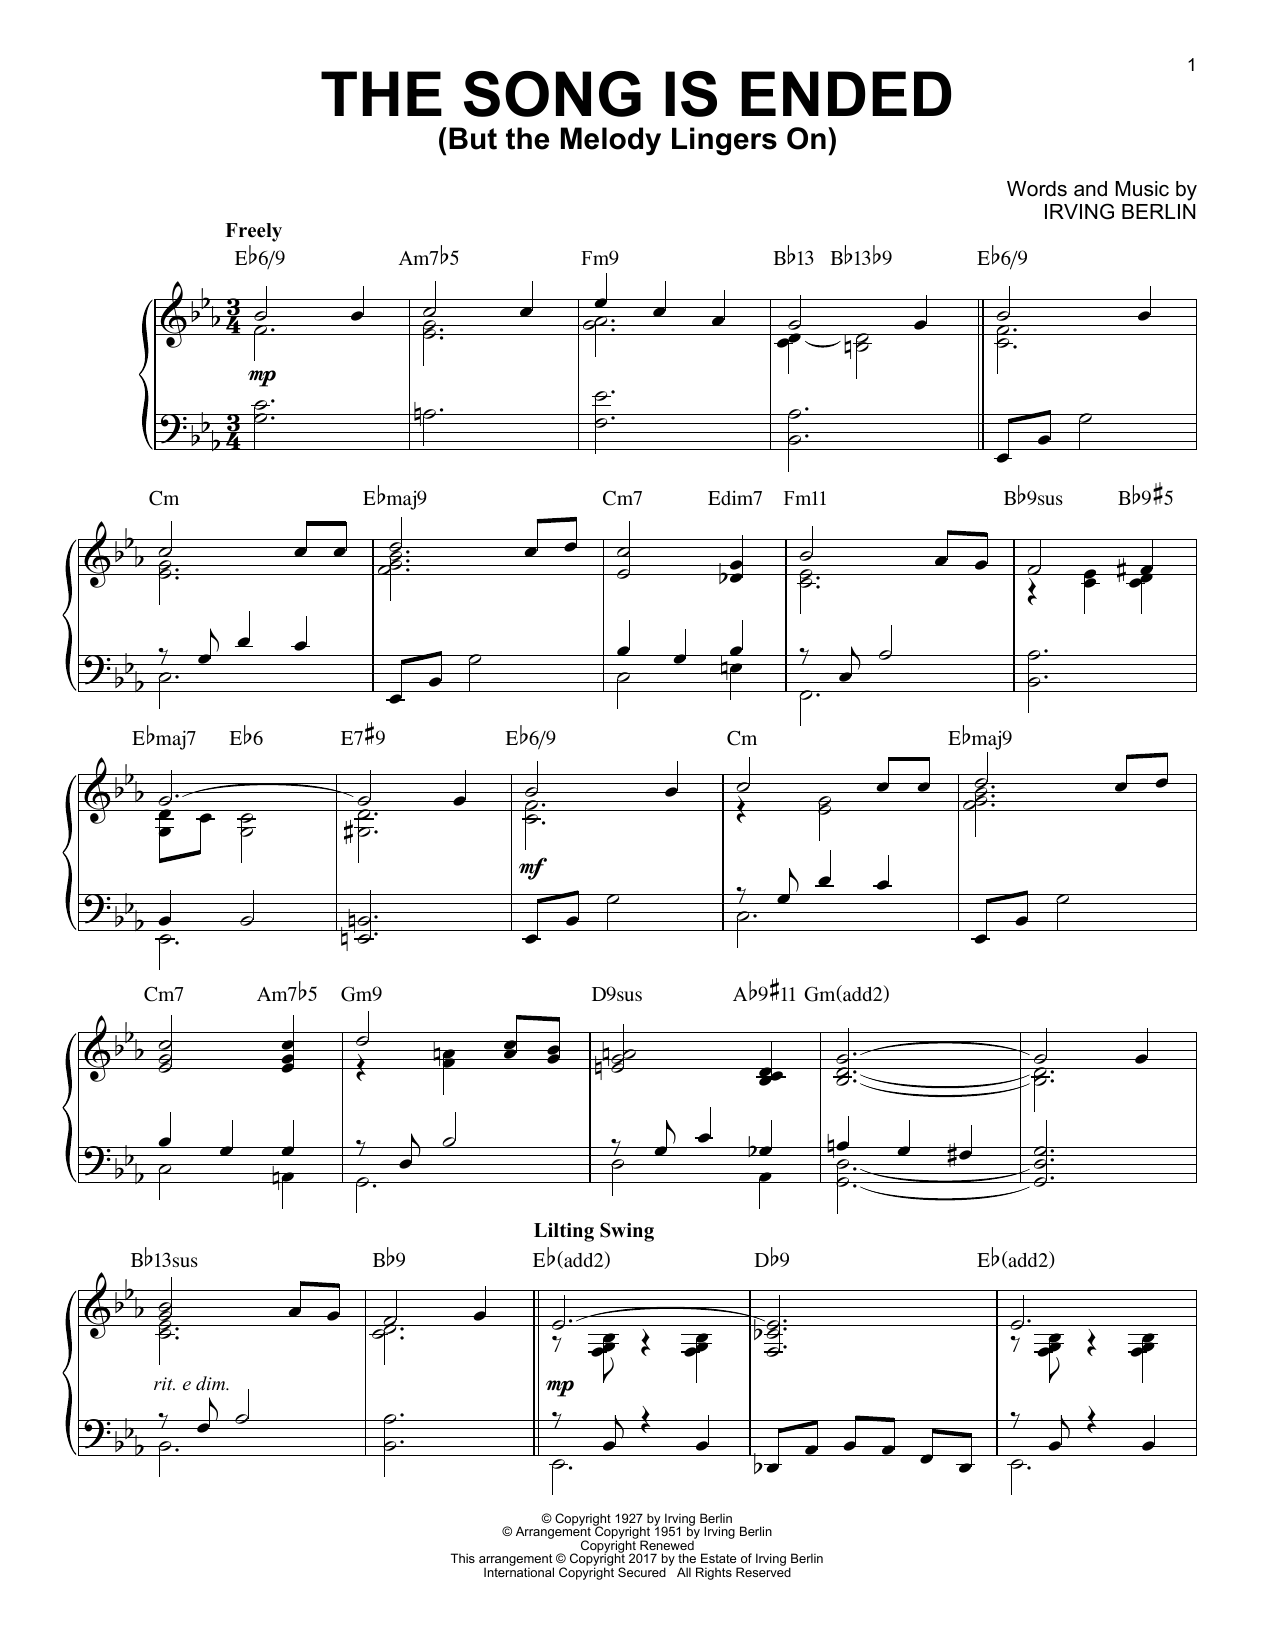 The Song Is Ended (But The Melody Lingers On) [Jazz version] sheet music